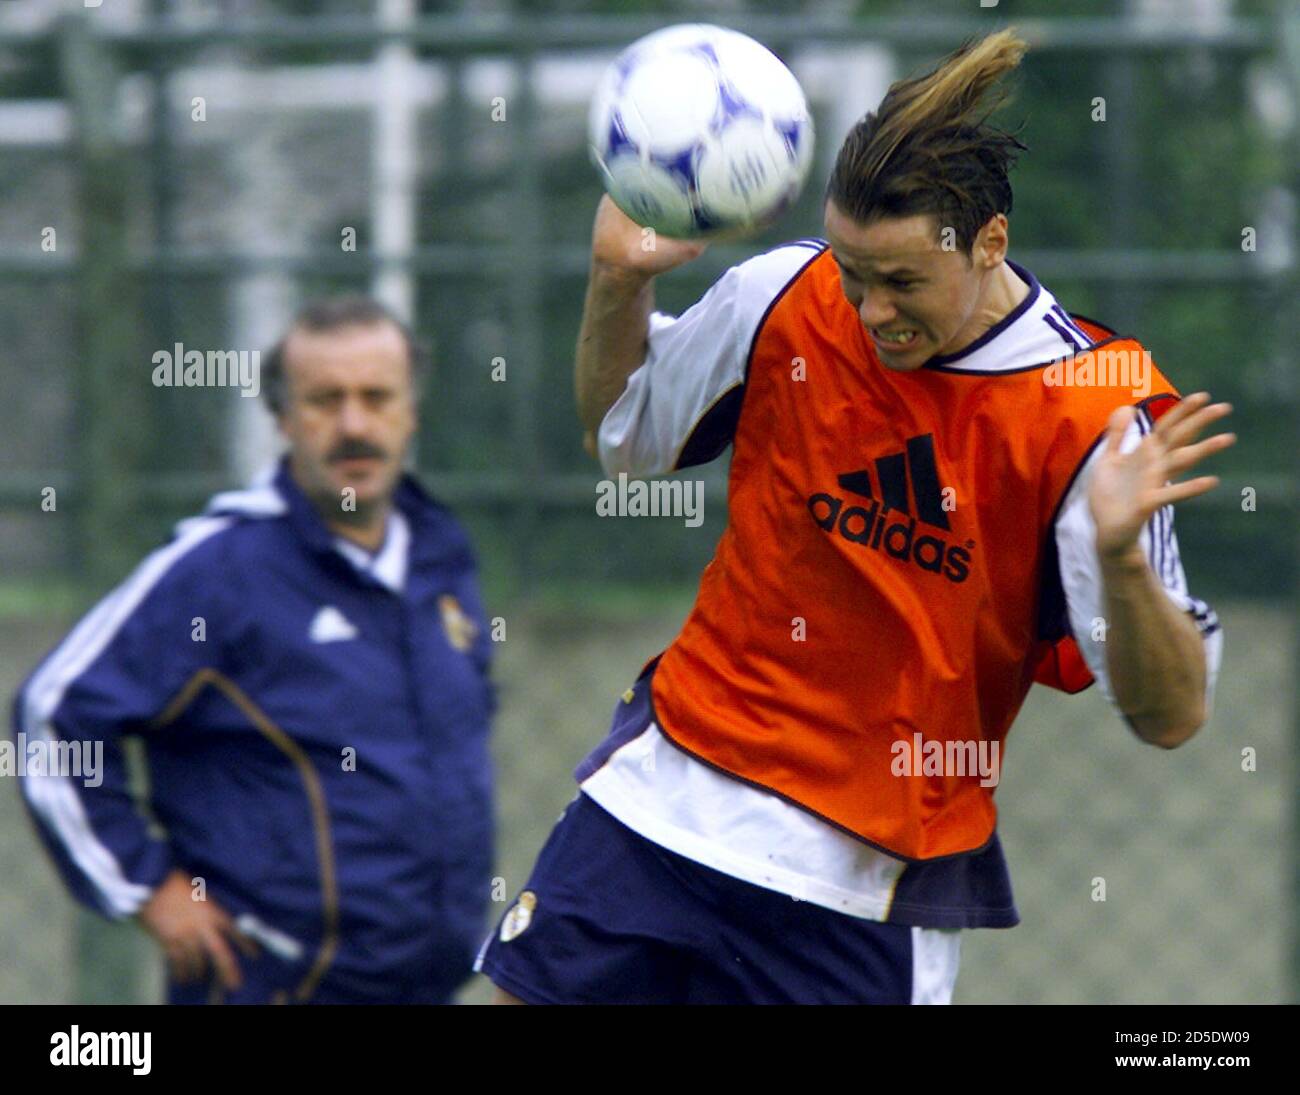 Argentine soccer player Fernando Carlos Redondo from Spanish team Real  Madrid heads the ball as Head coach Vicente Del bosque Gonzalez looks on  during a training session in Sao Paulo, January 9.